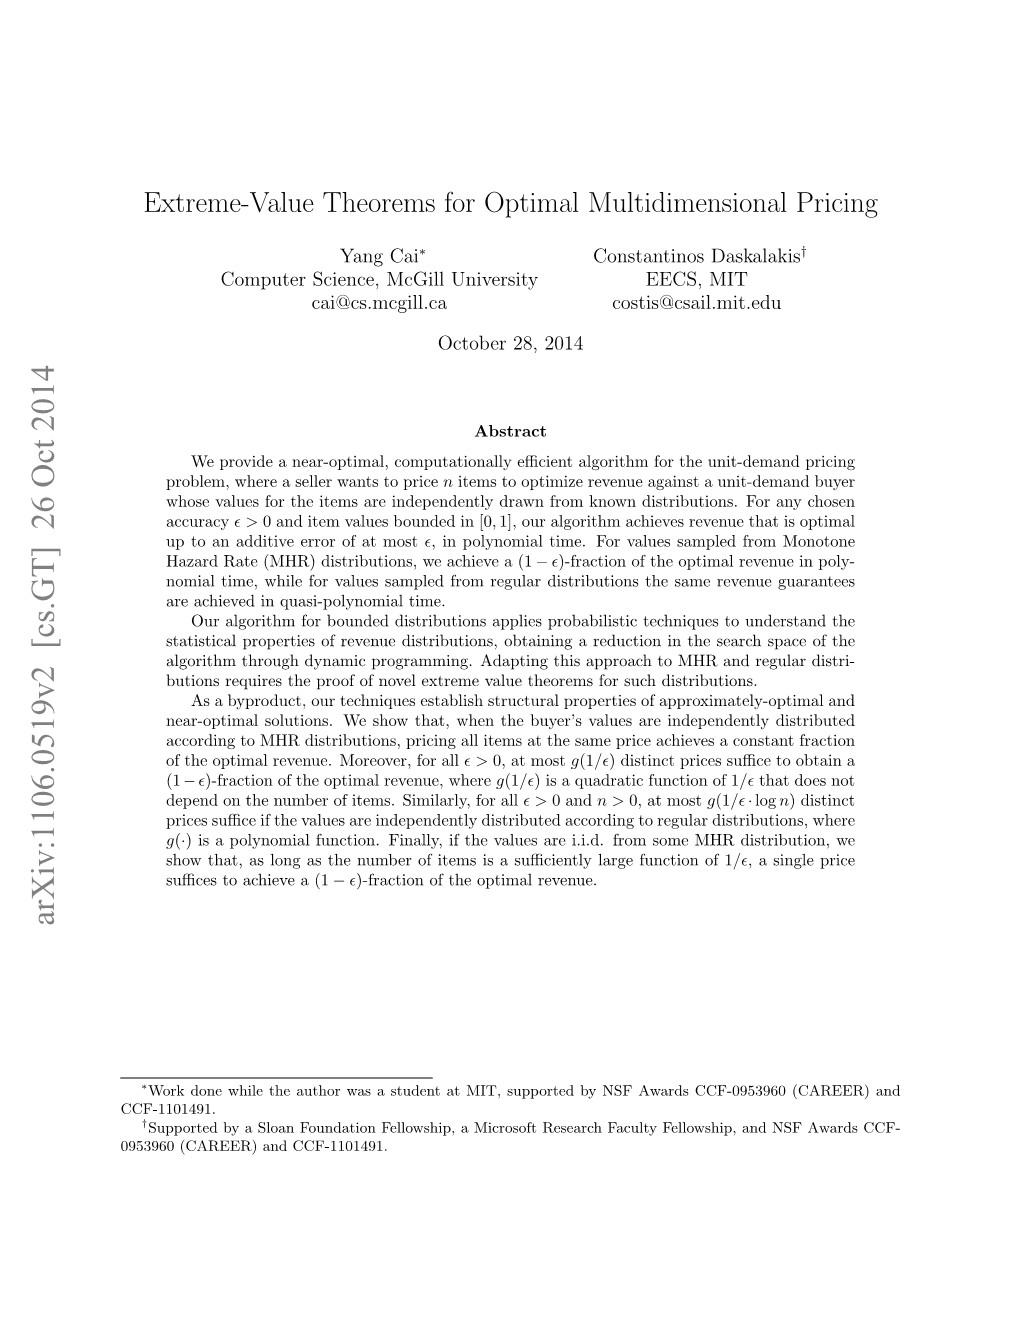 Extreme-Value Theorems for Optimal Multidimensional Pricing